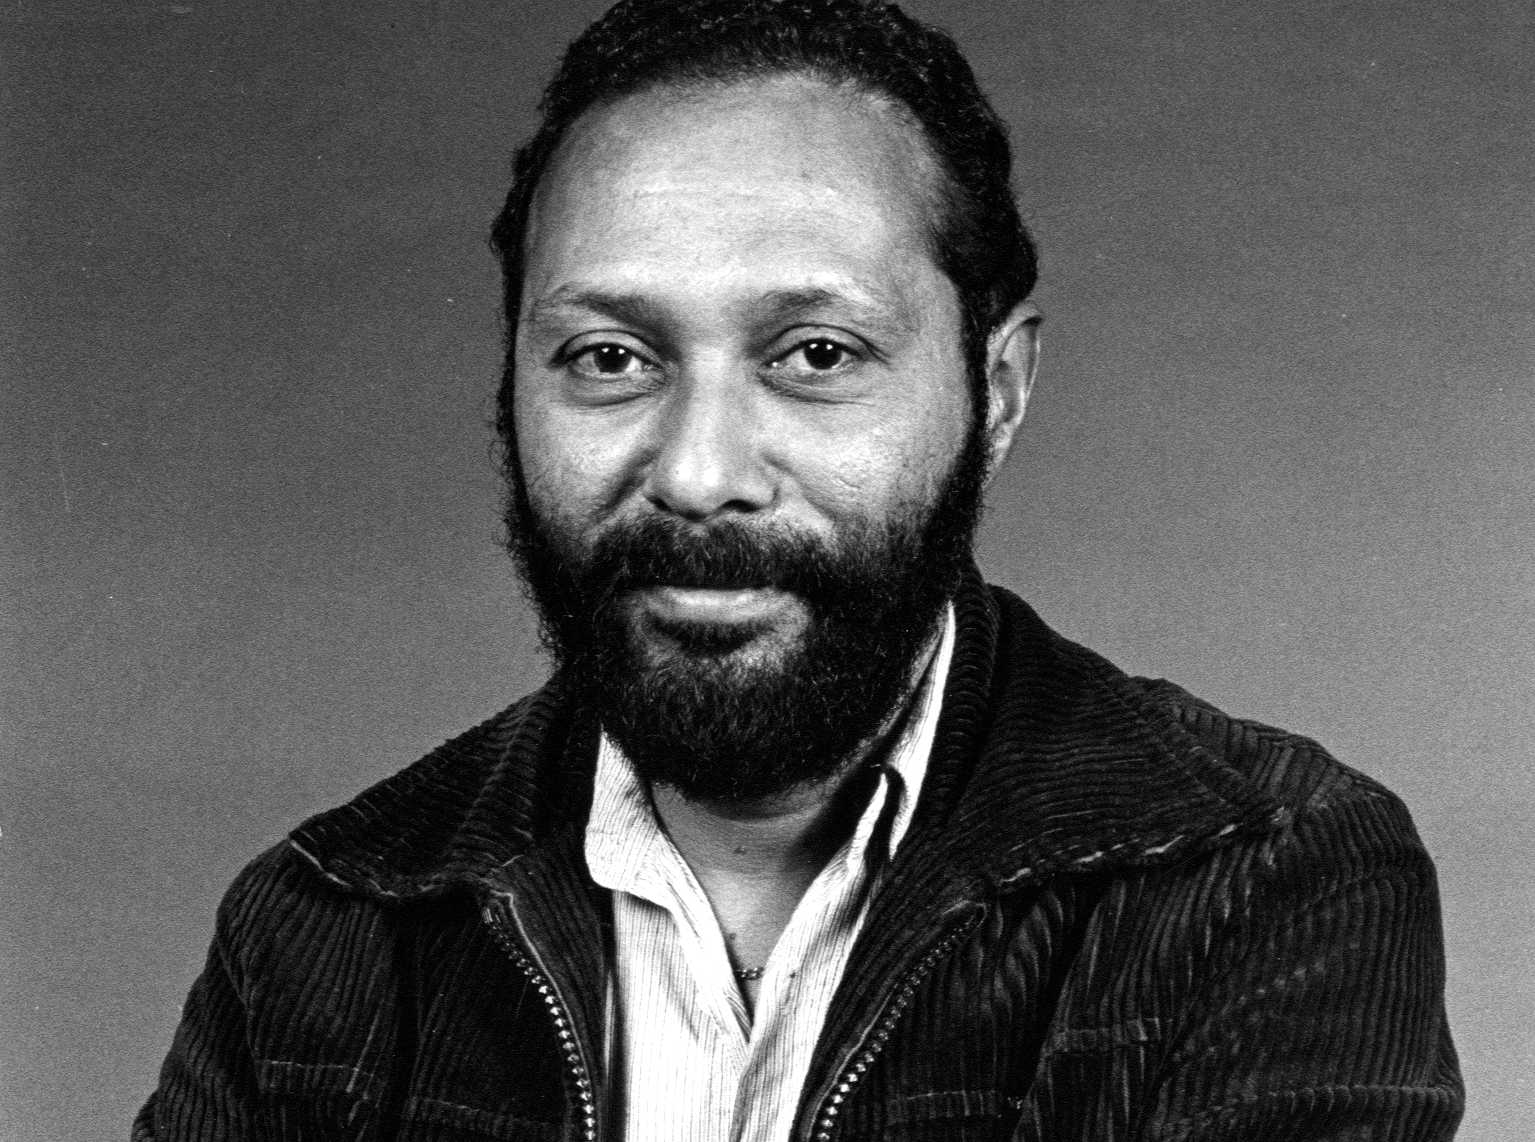 Stuart Hall (1932-2014), Professor of Sociology from 1979 to 1997.